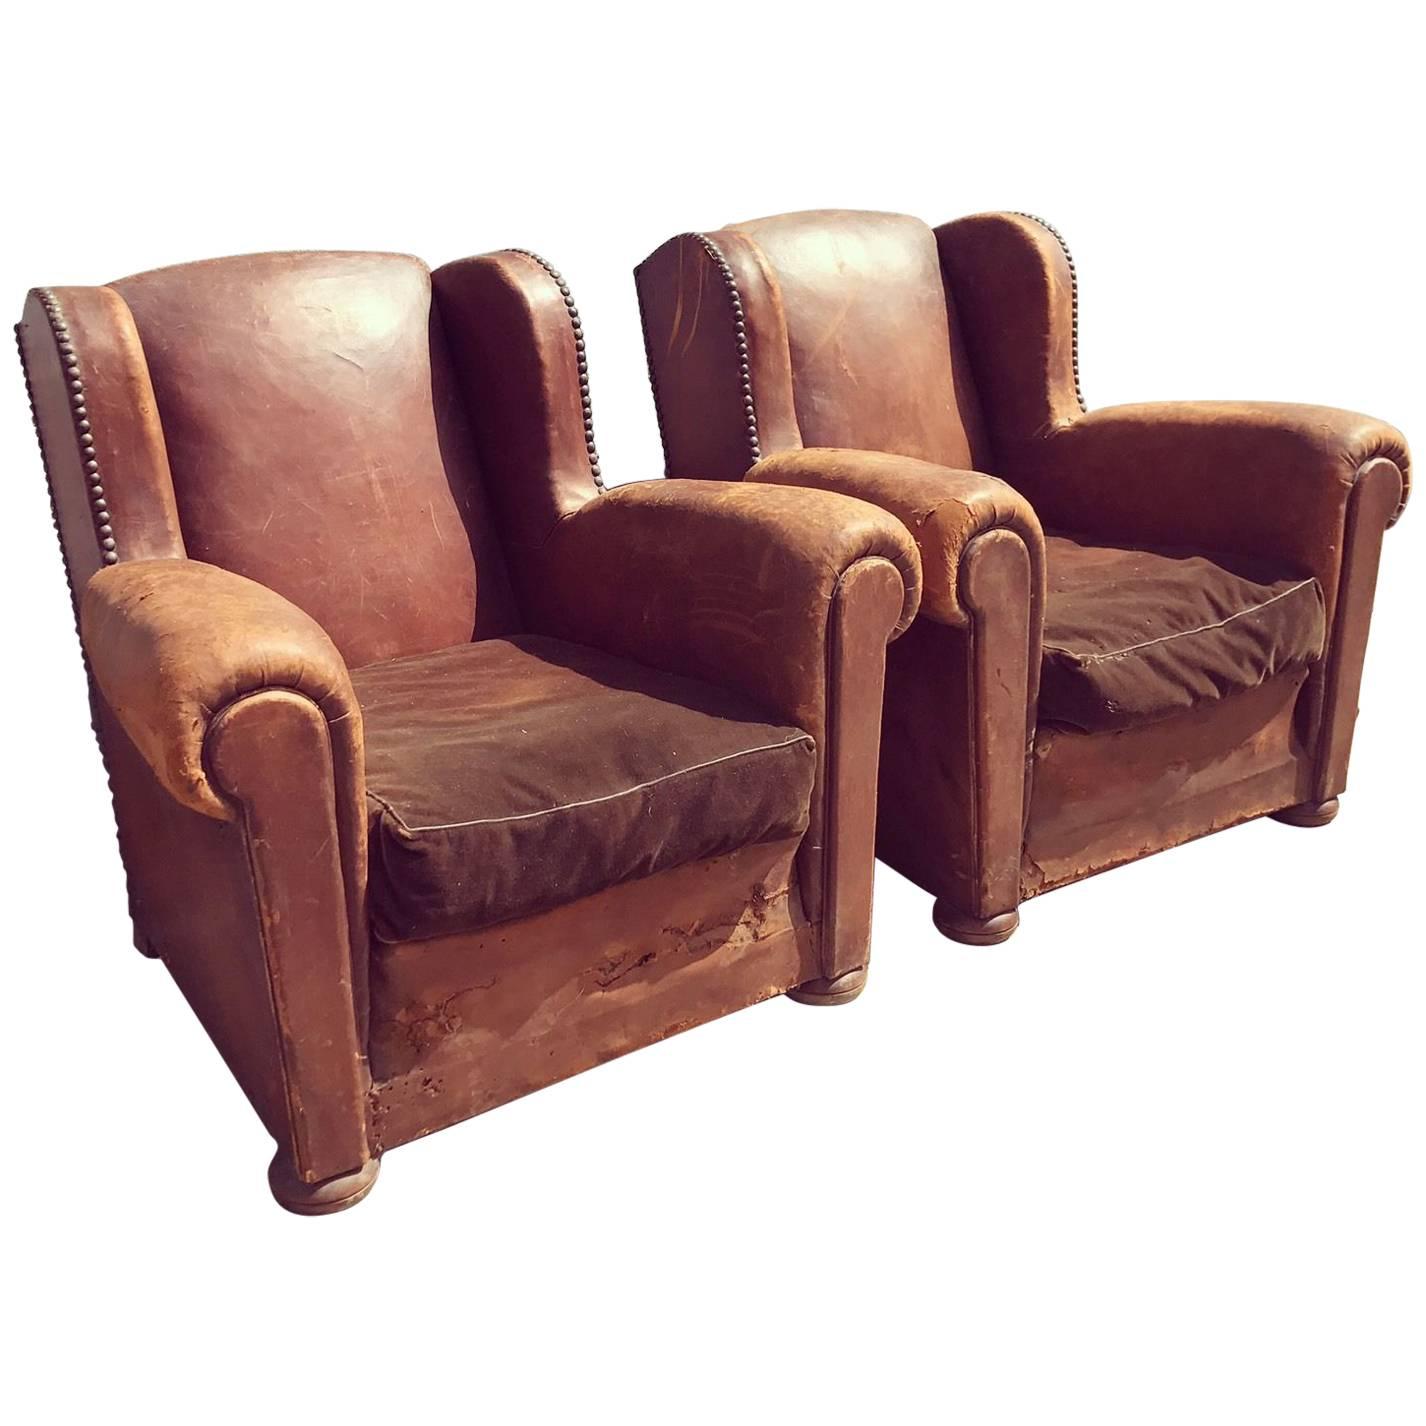 Beautiful French Leather Antique Club Chairs, Industrial, Vintage X2 For Sale